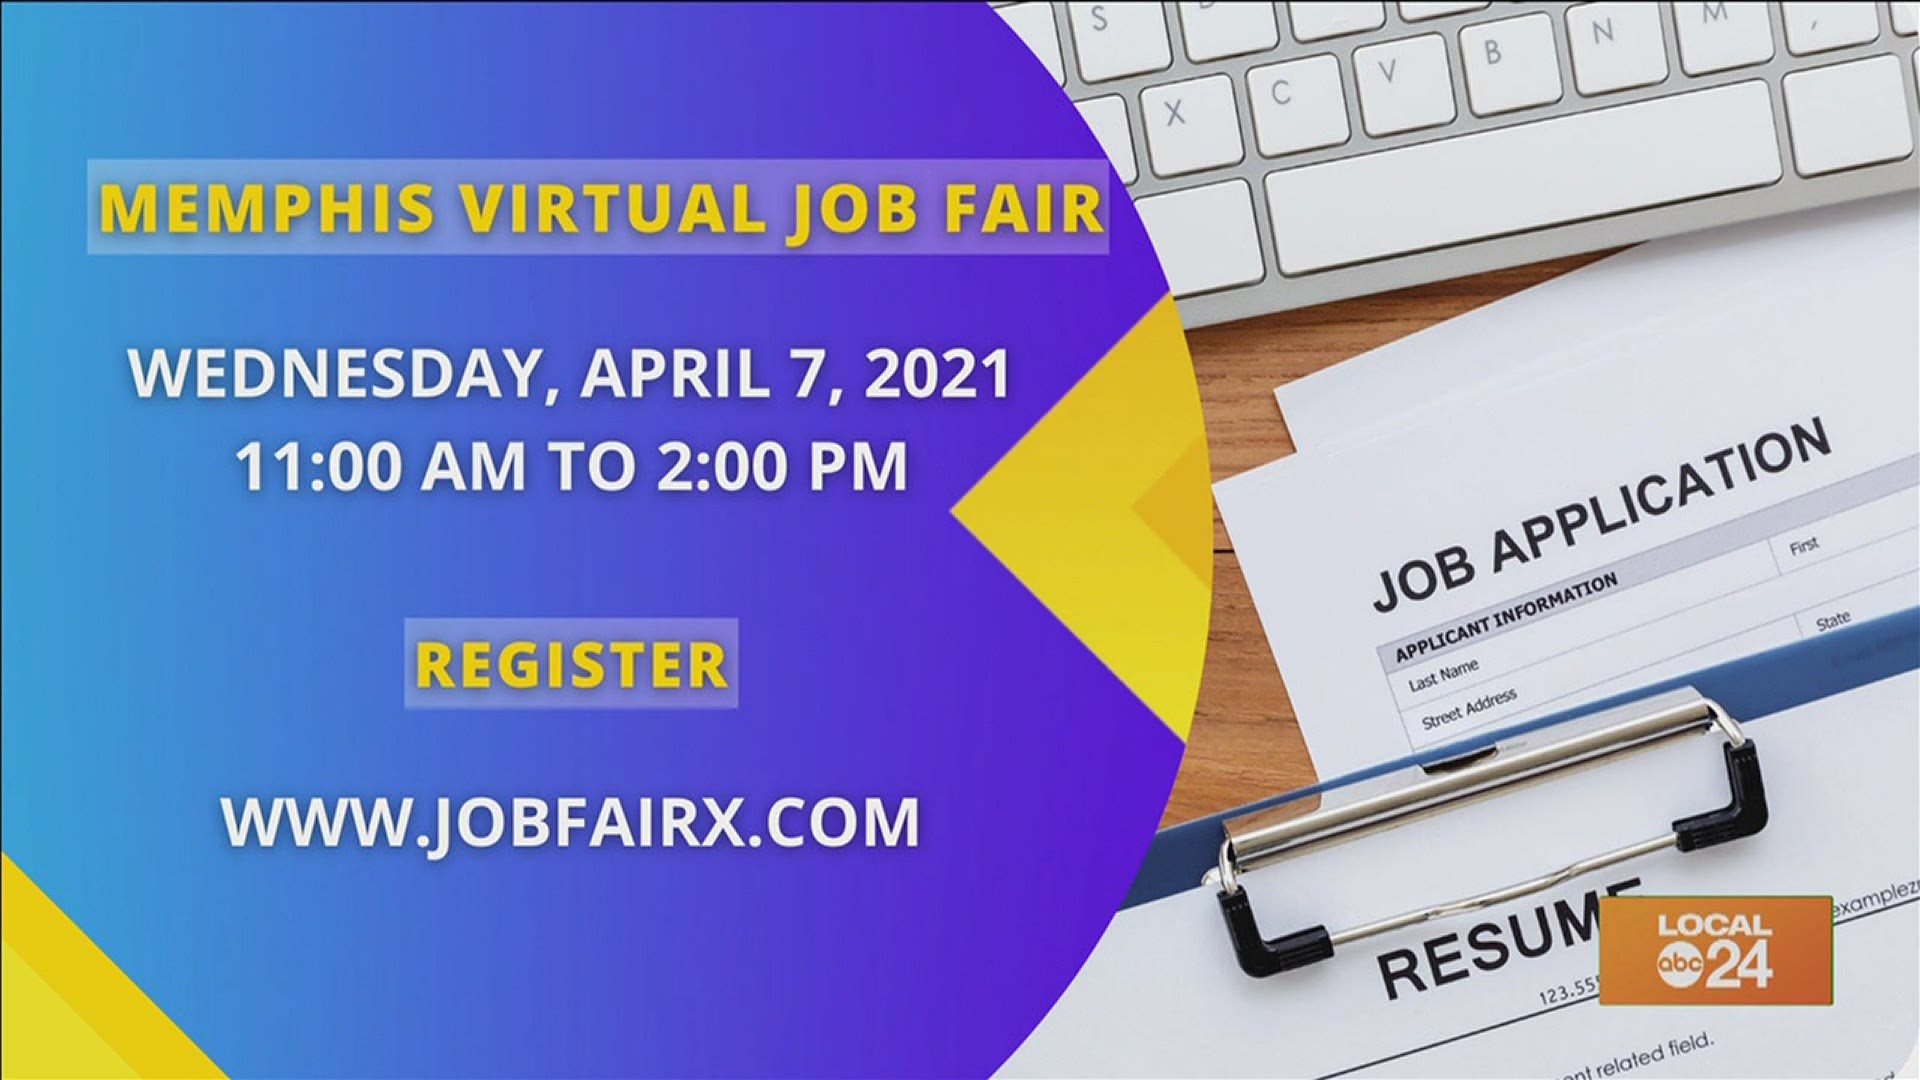 Looking for a job? Check out the Memphis virtual job fair courtesy of Sydney Neely on "The Shortcut"! They even do interviews on the spot! :)